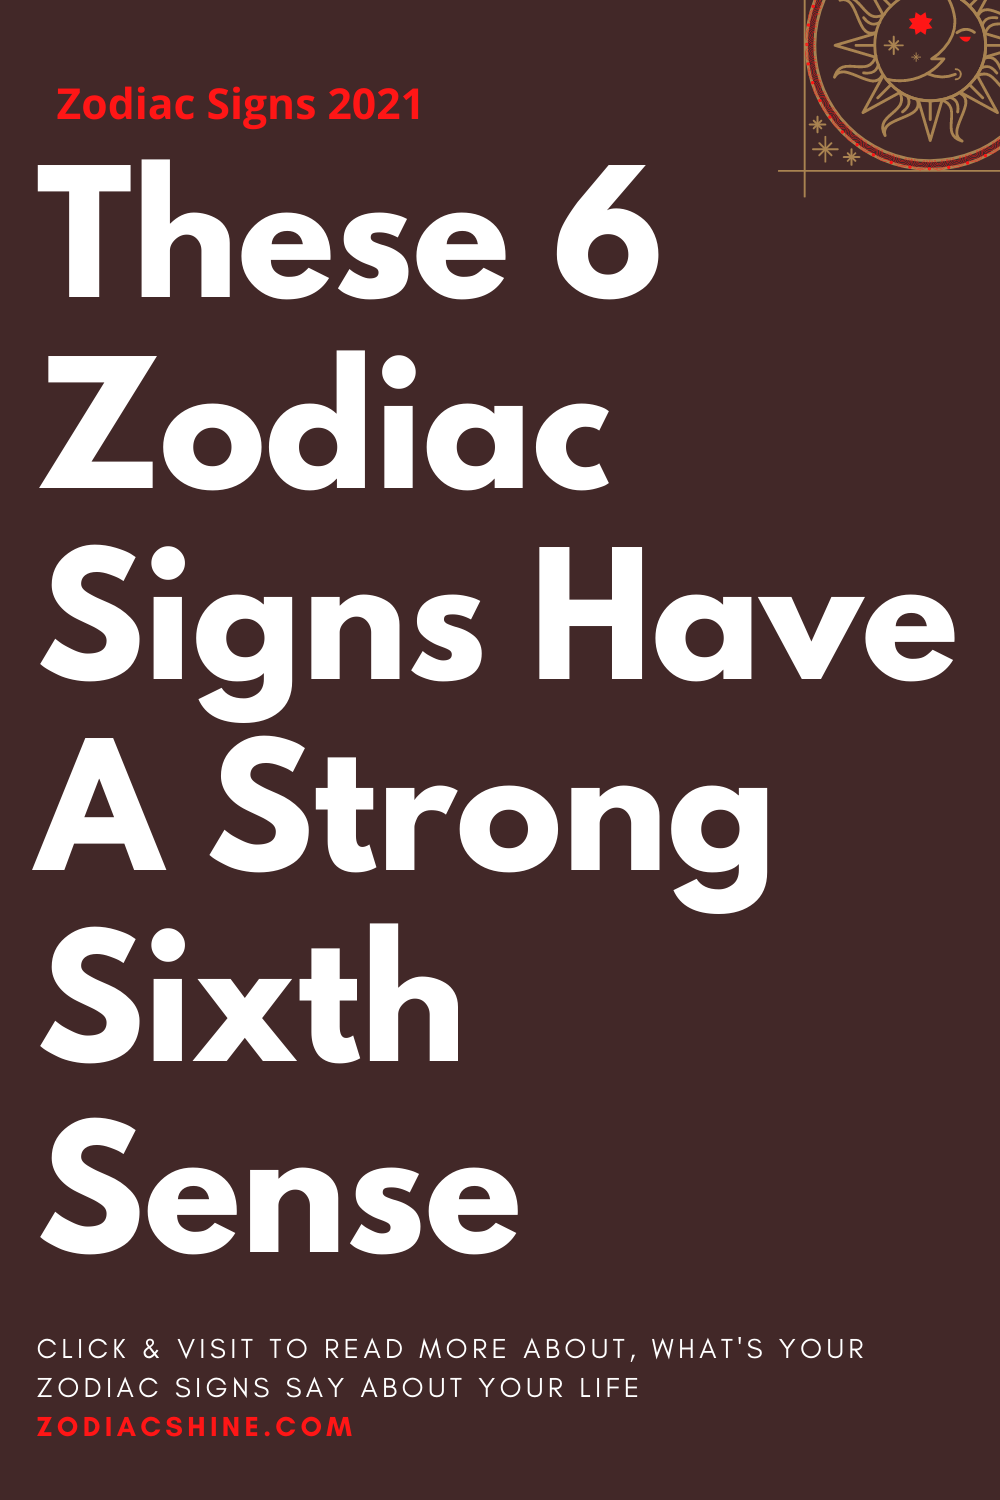 These 6 Zodiac Signs Have A Strong Sixth Sense